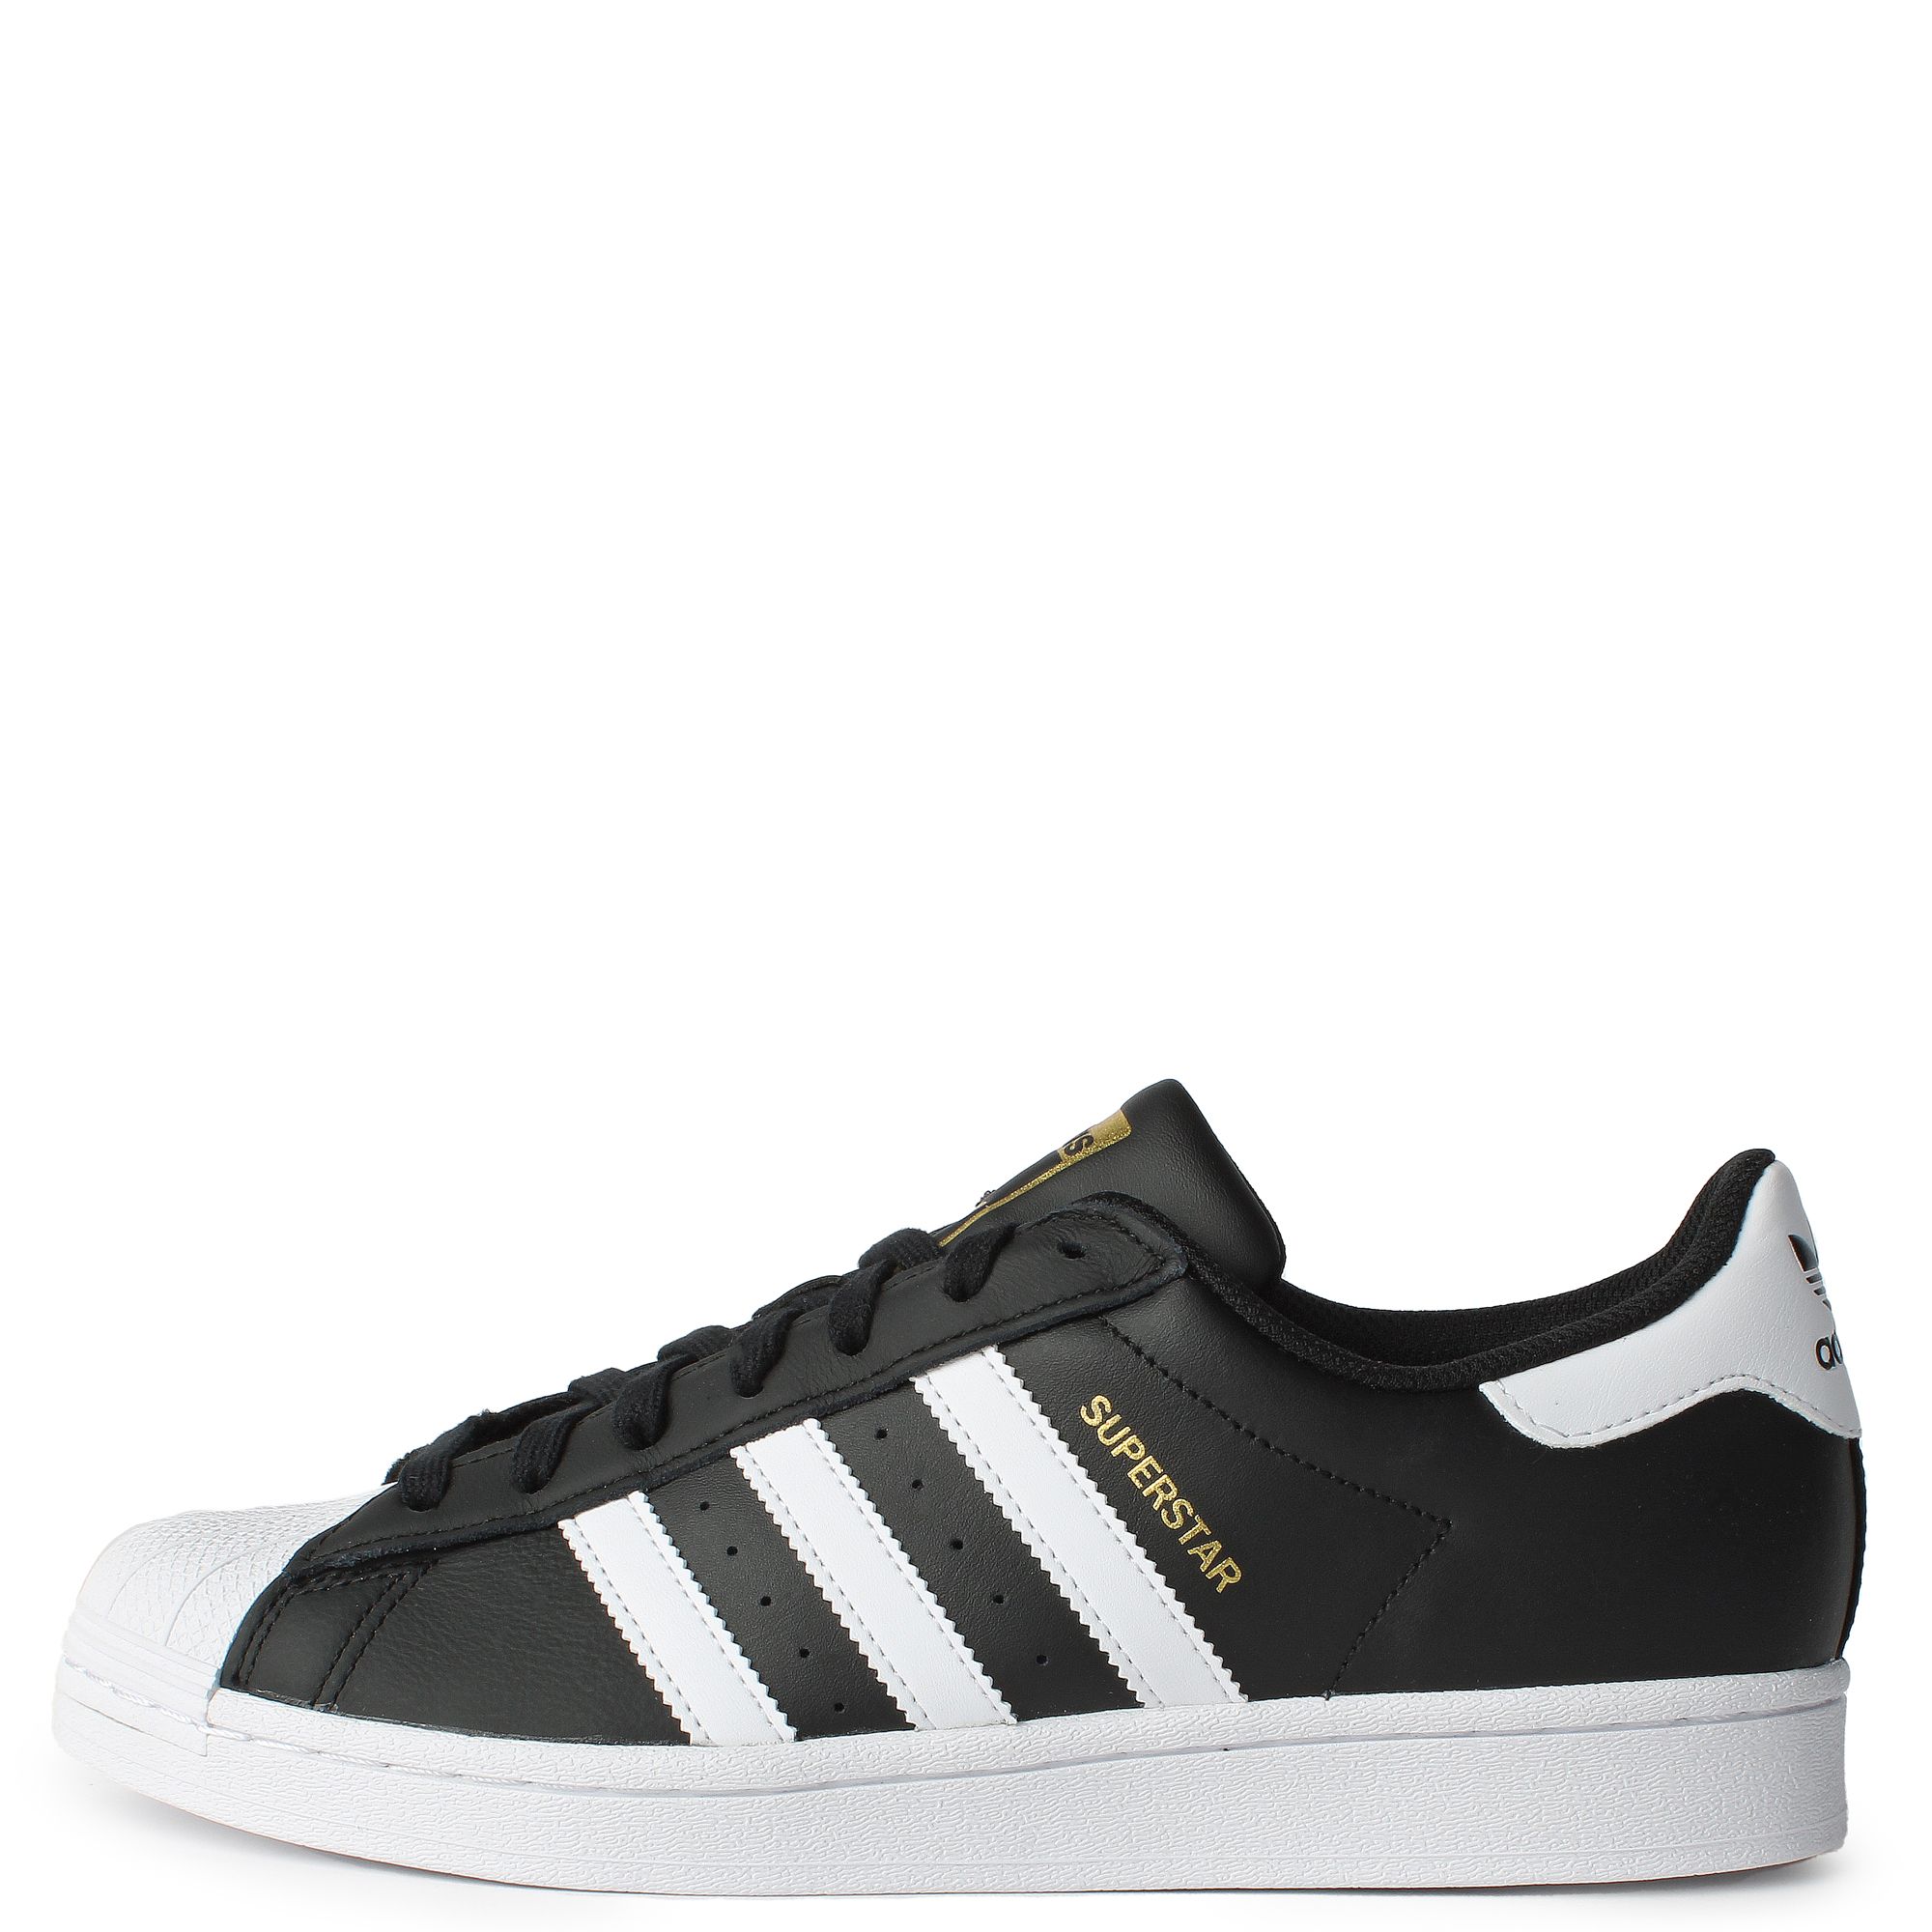 adidas superstar shoes black and white